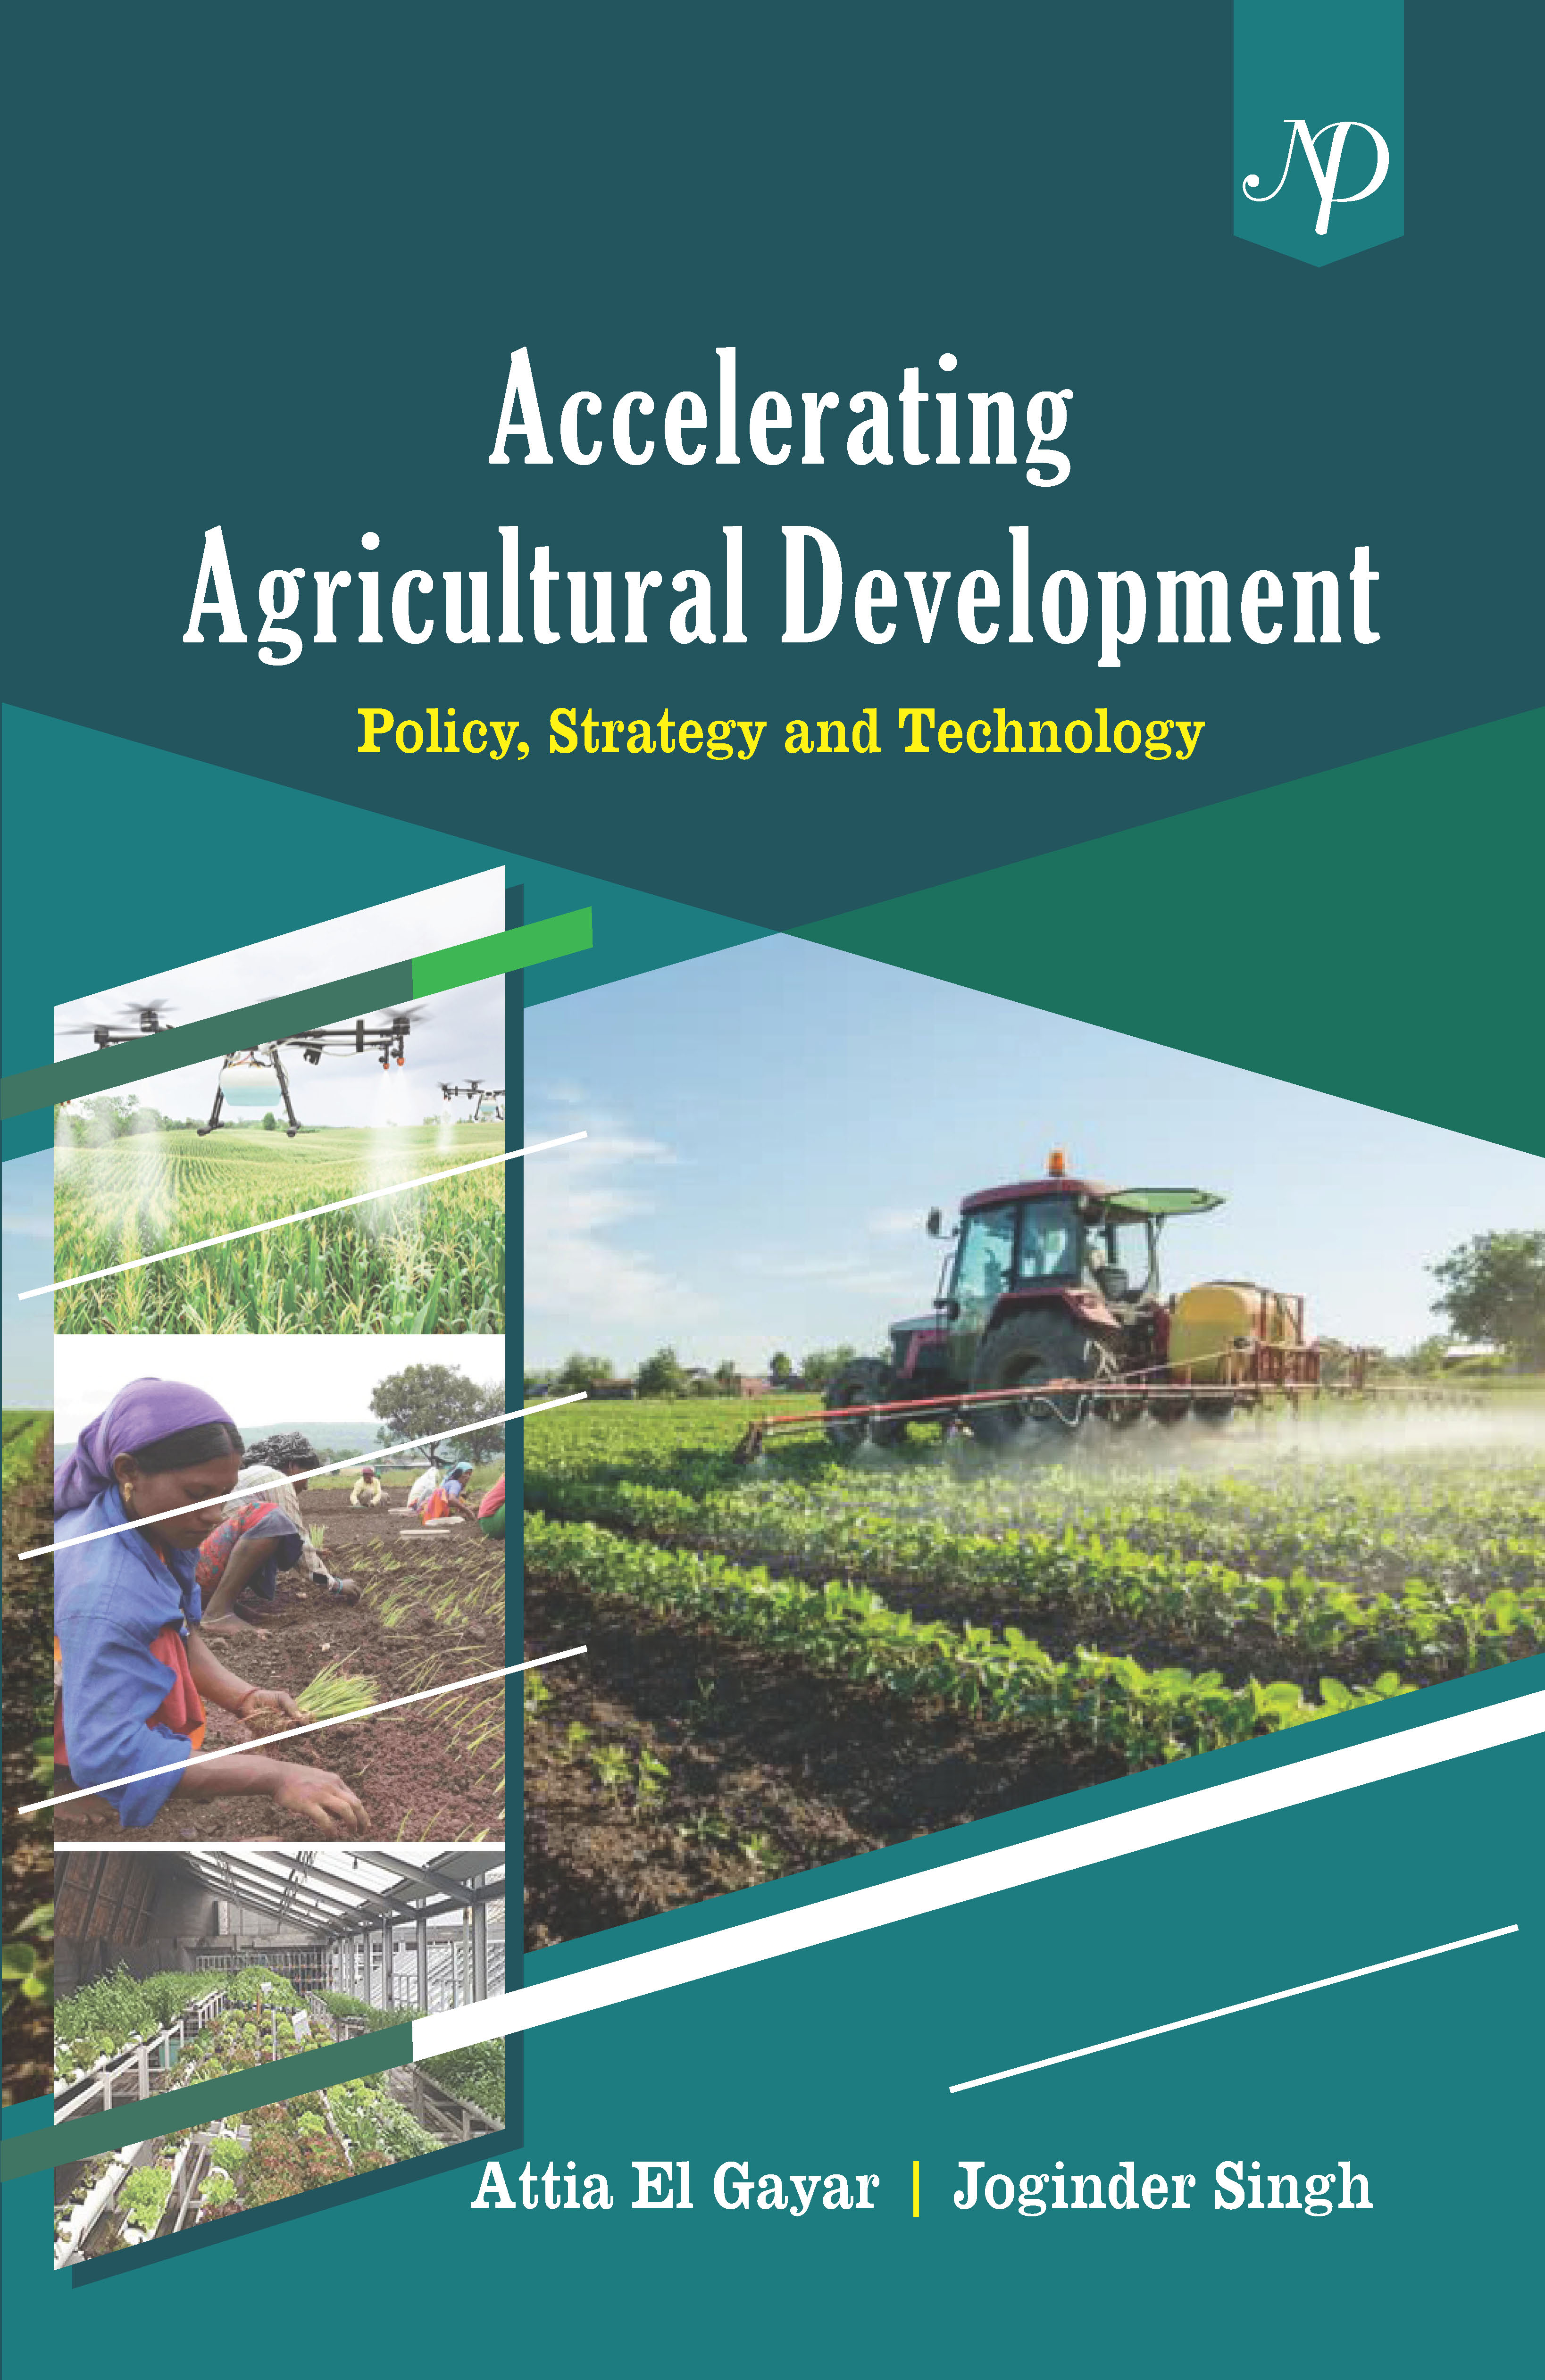 ACCELERATING AGRICULTURAL  DEVELOPMENT Cover.jpg